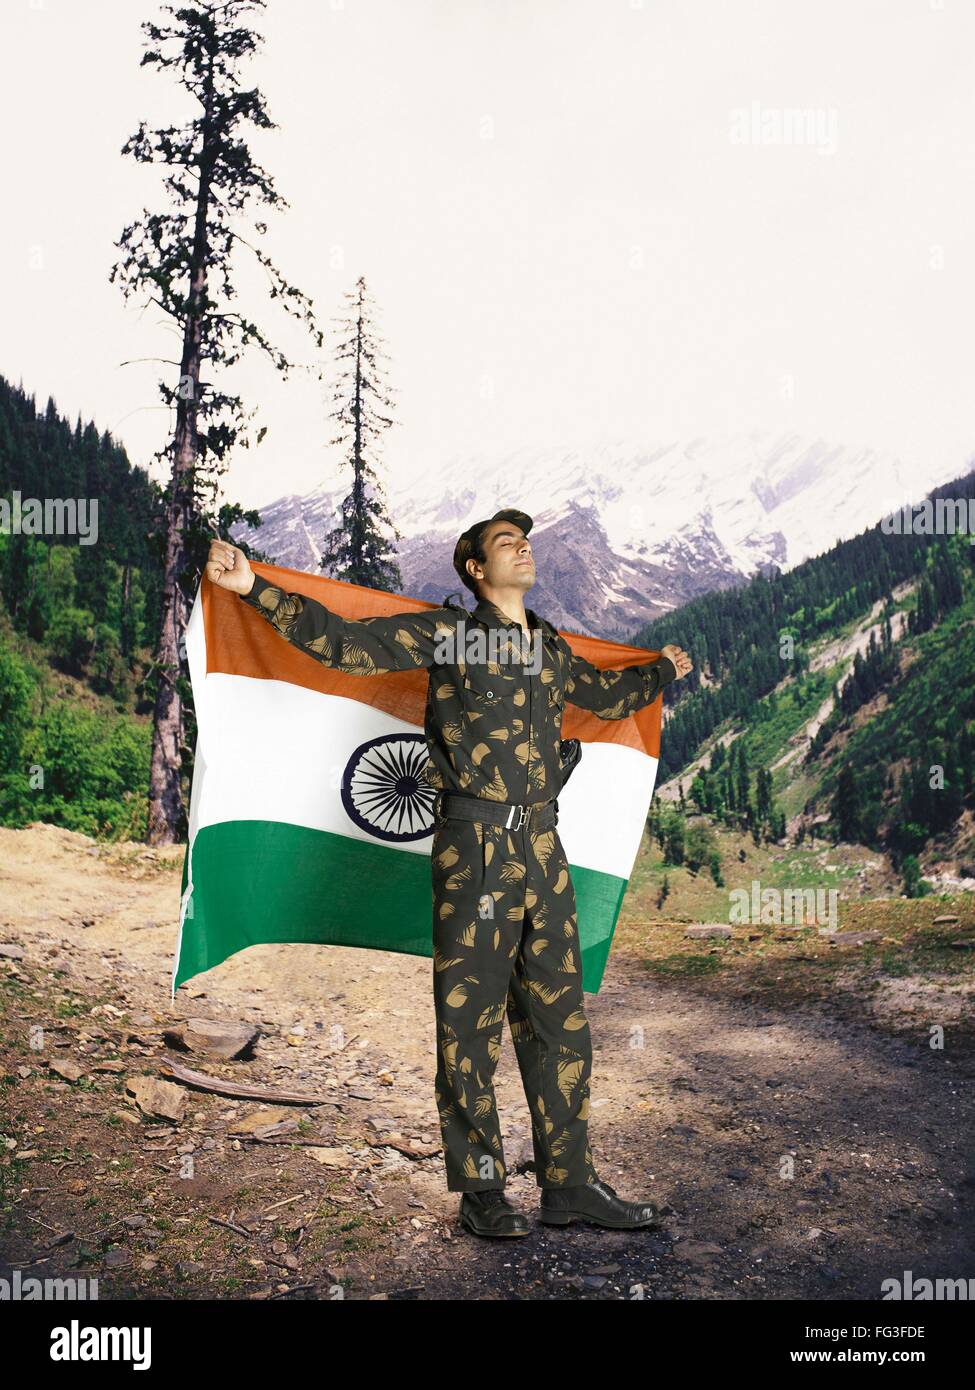 Indian army soldier holding national flag on his backside mountain in background MR Stock Photo